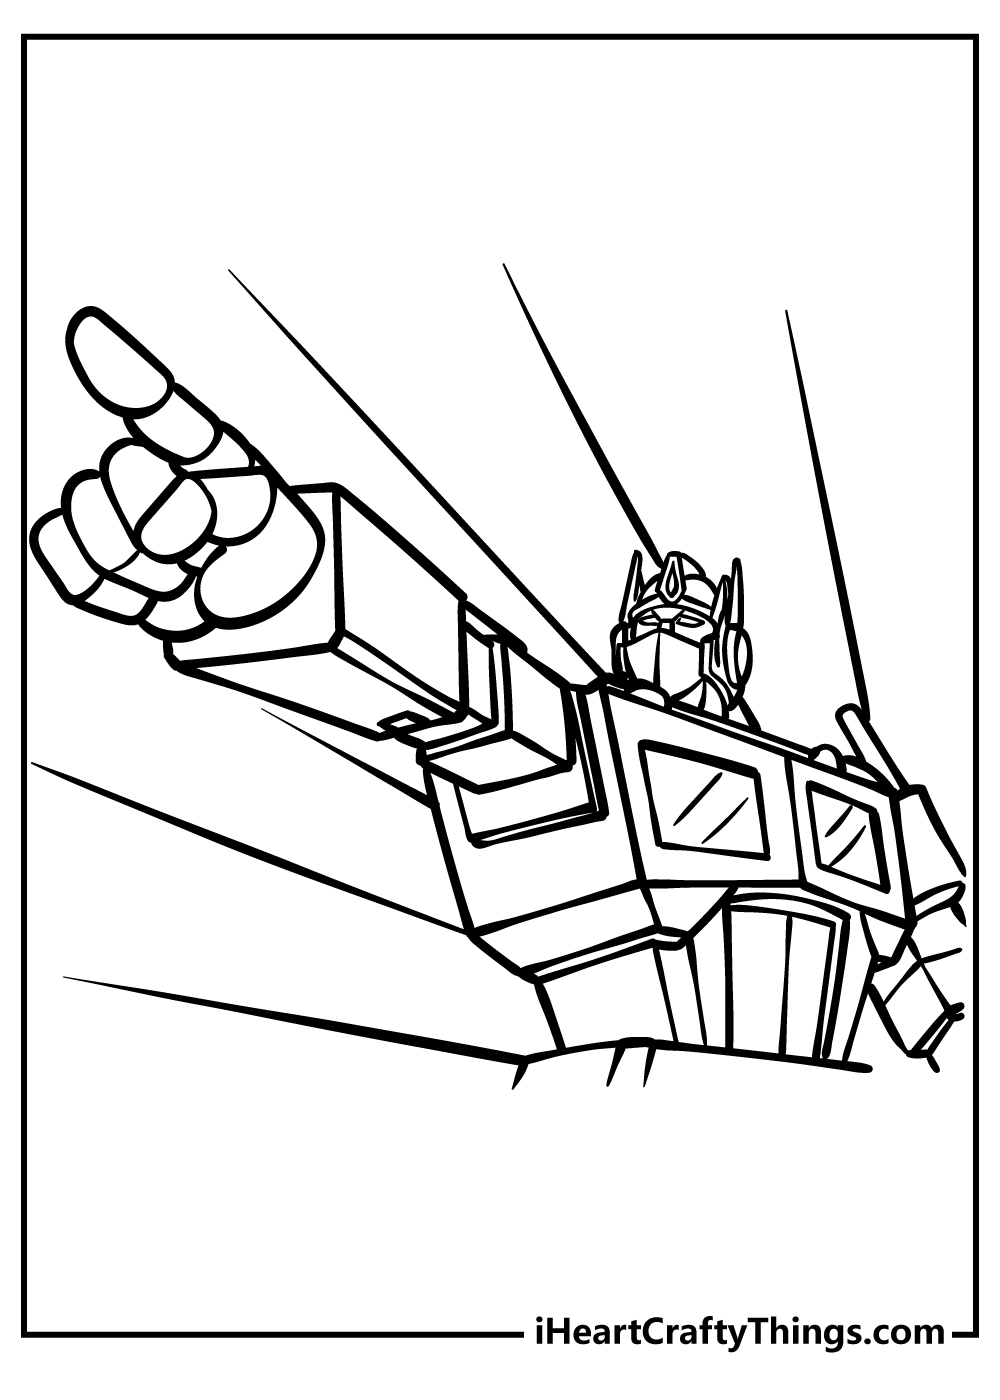 Transformers Coloring Pages for adults free printable